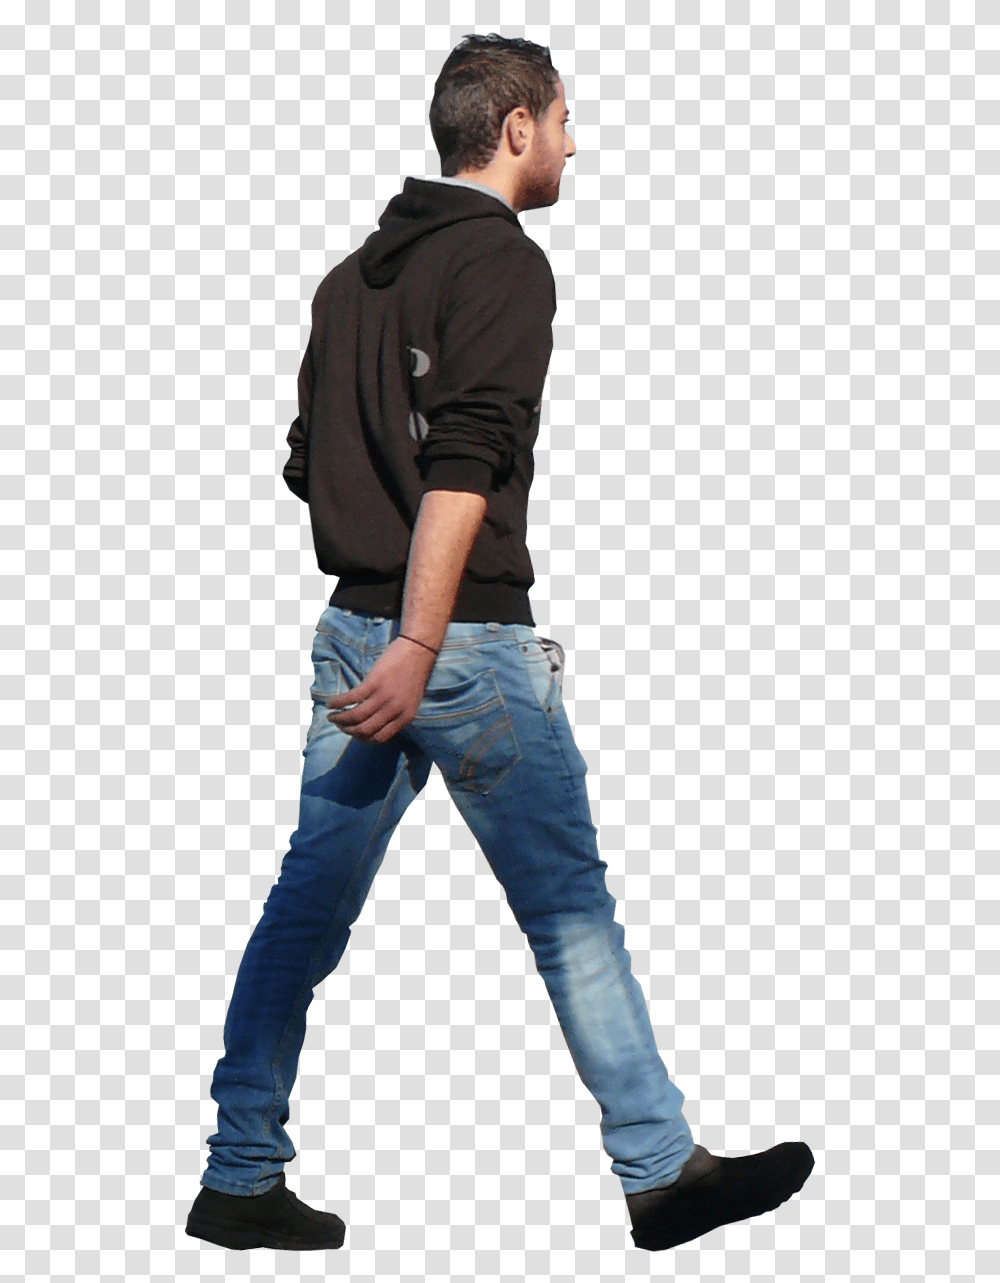 Walking Person Rendering Architecture Person Walking Away, Pants, Clothing, Apparel, Jeans Transparent Png